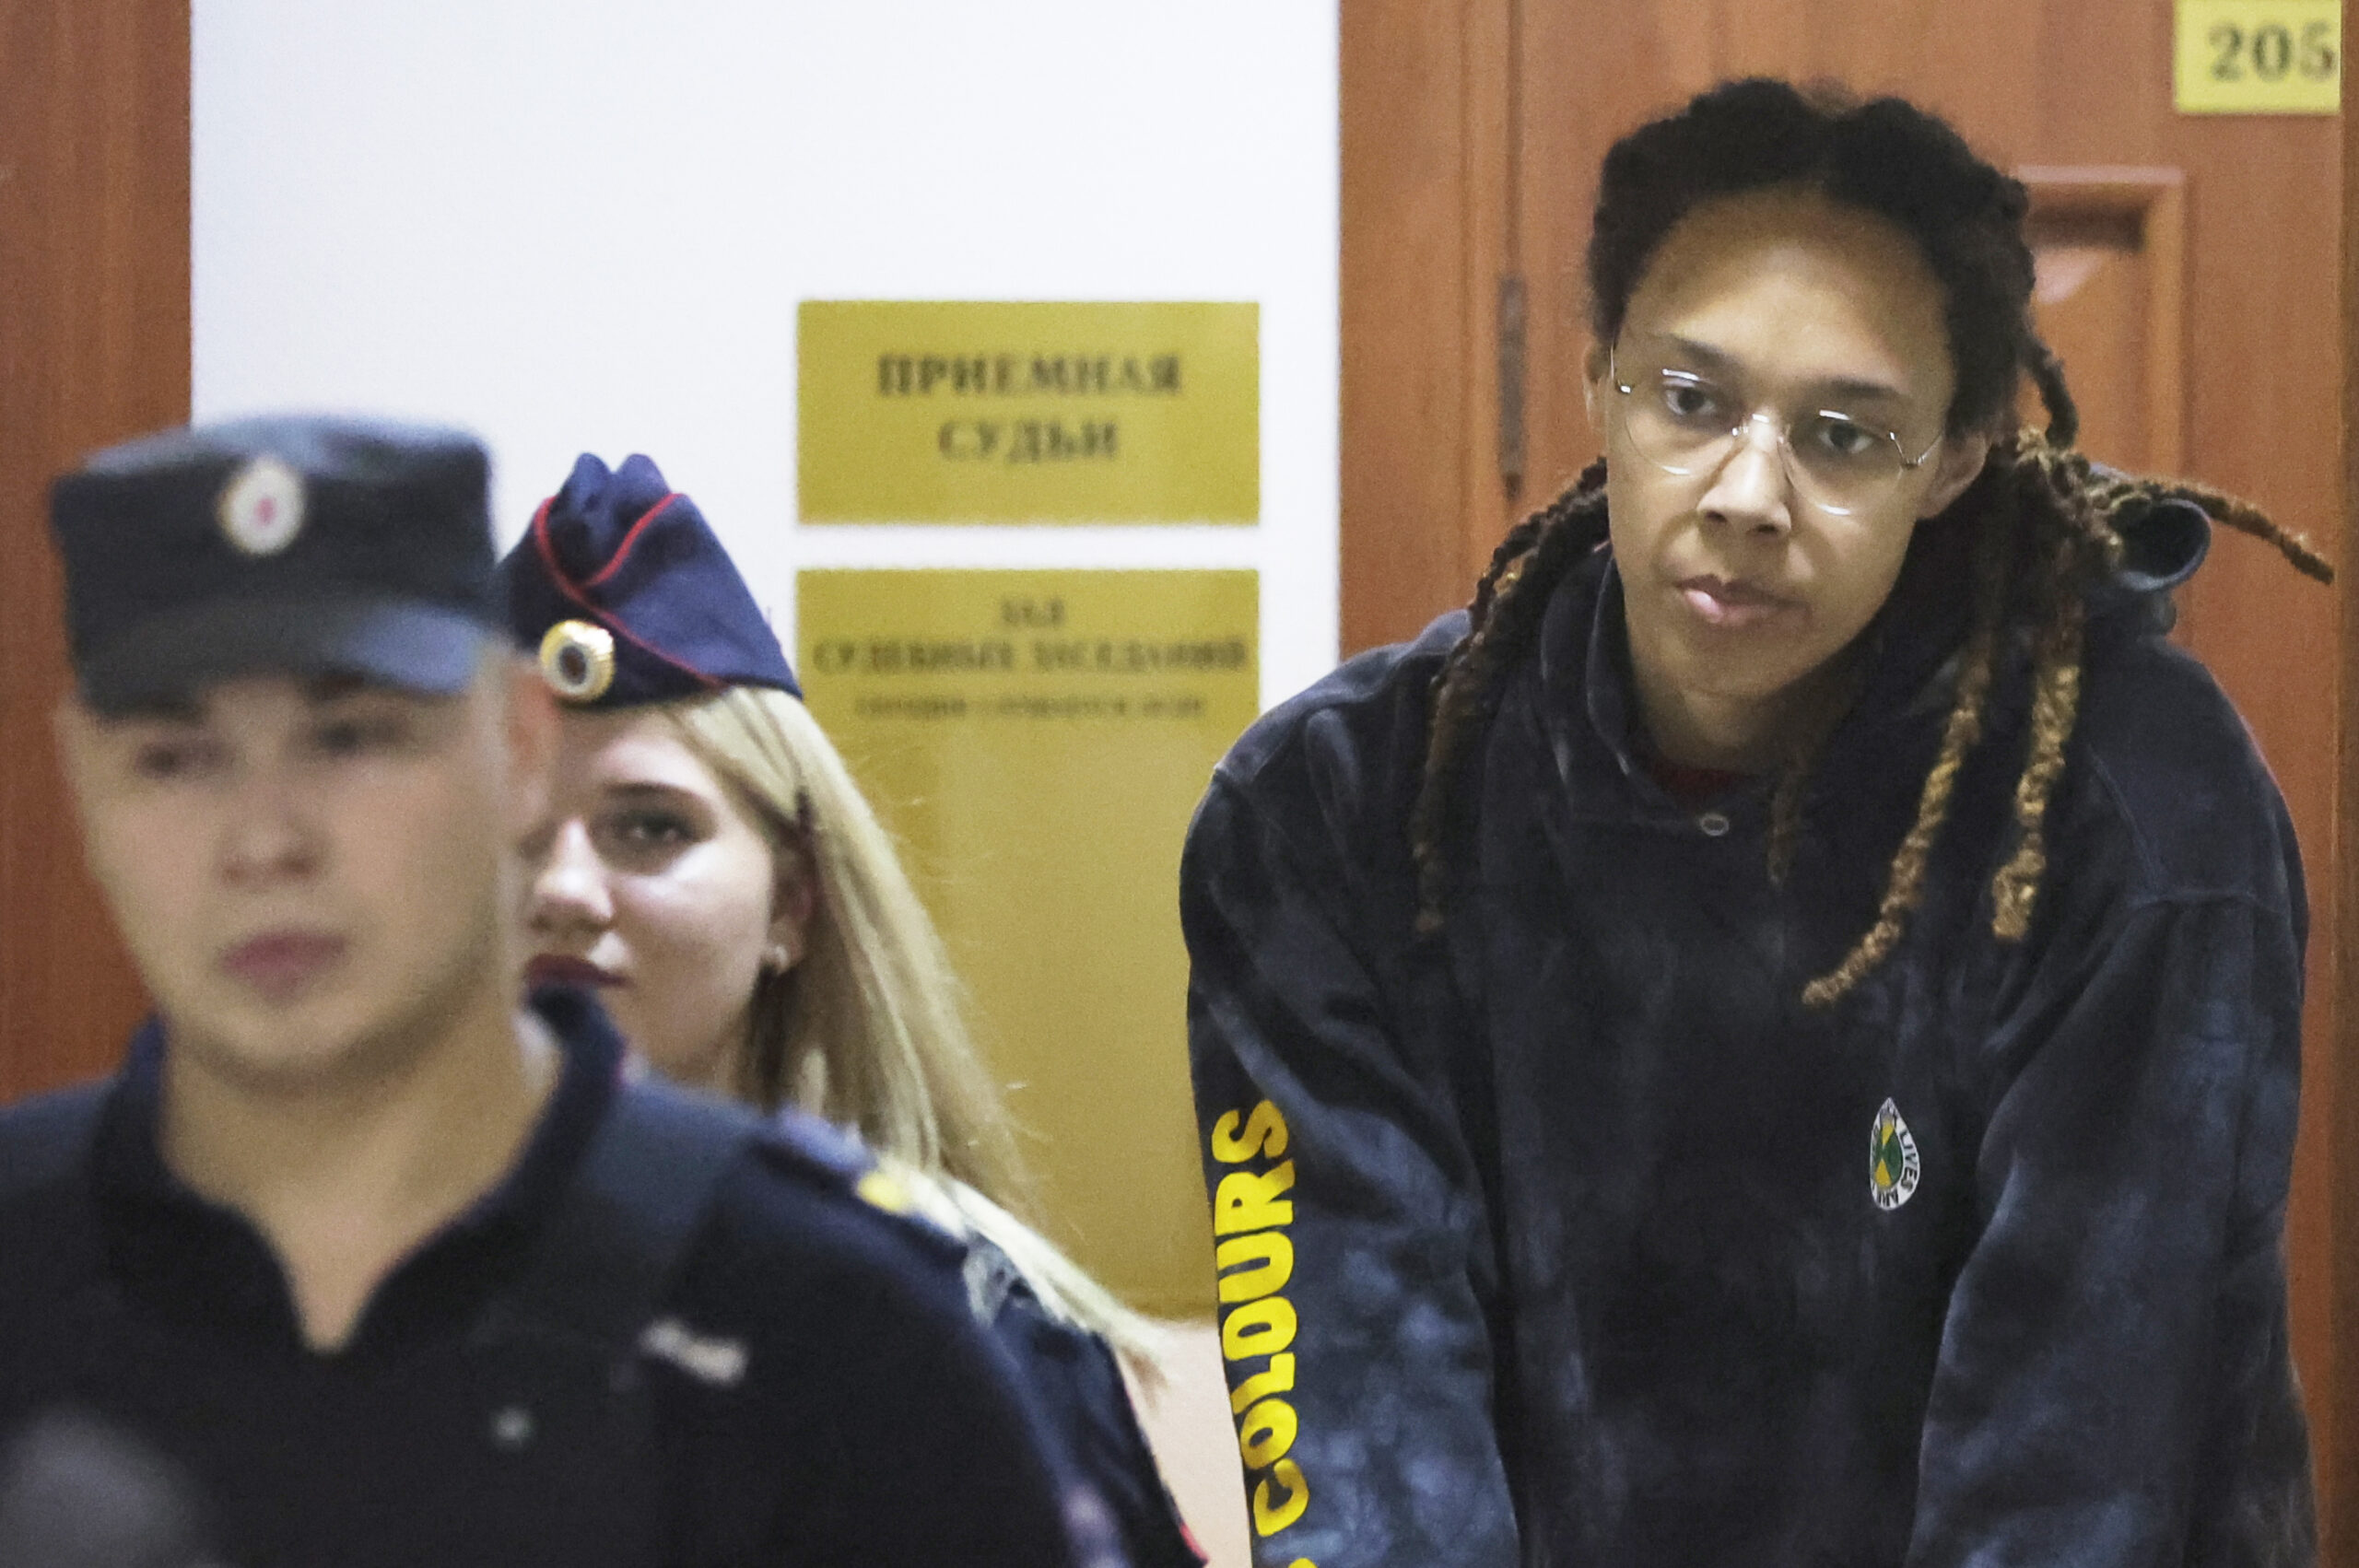 The United States offers a deal to Russia for the release of WNBA star Brittney Griner